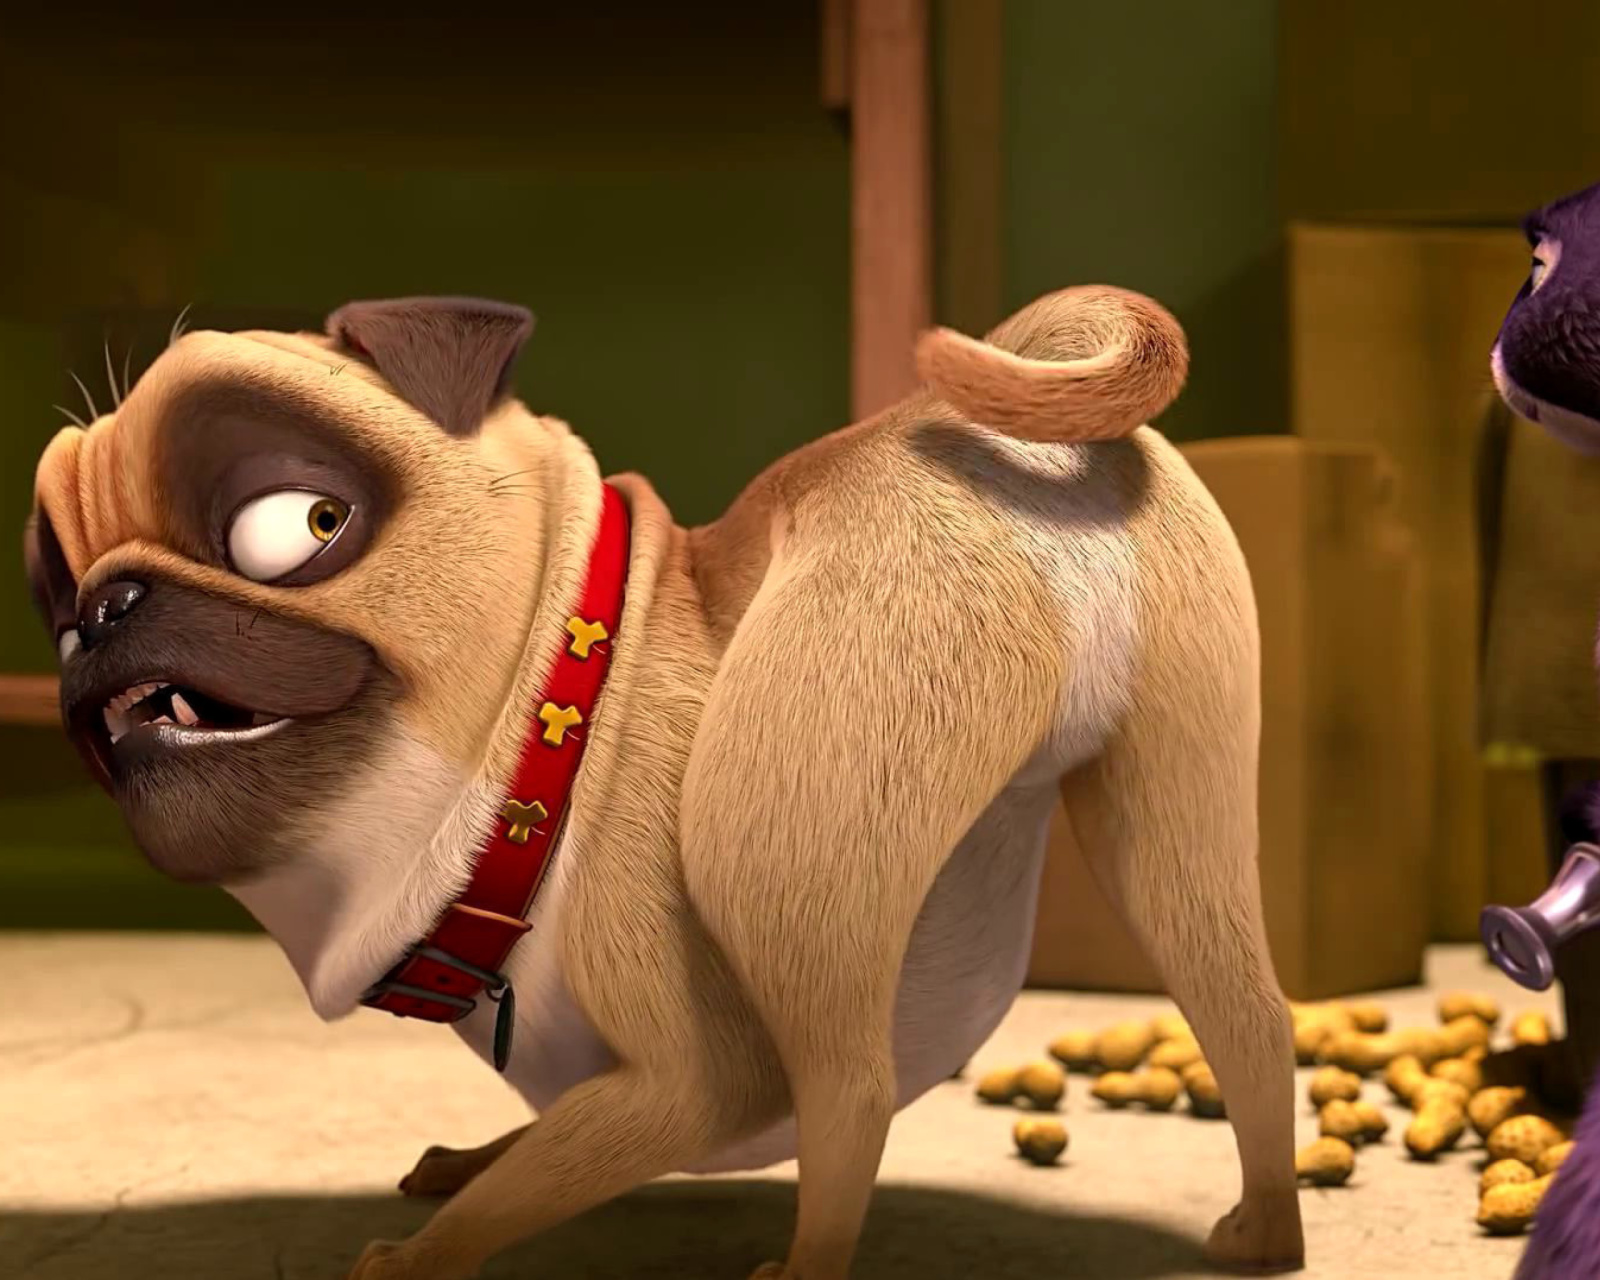 Precious and Surly in The Nut Job screenshot #1 1600x1280